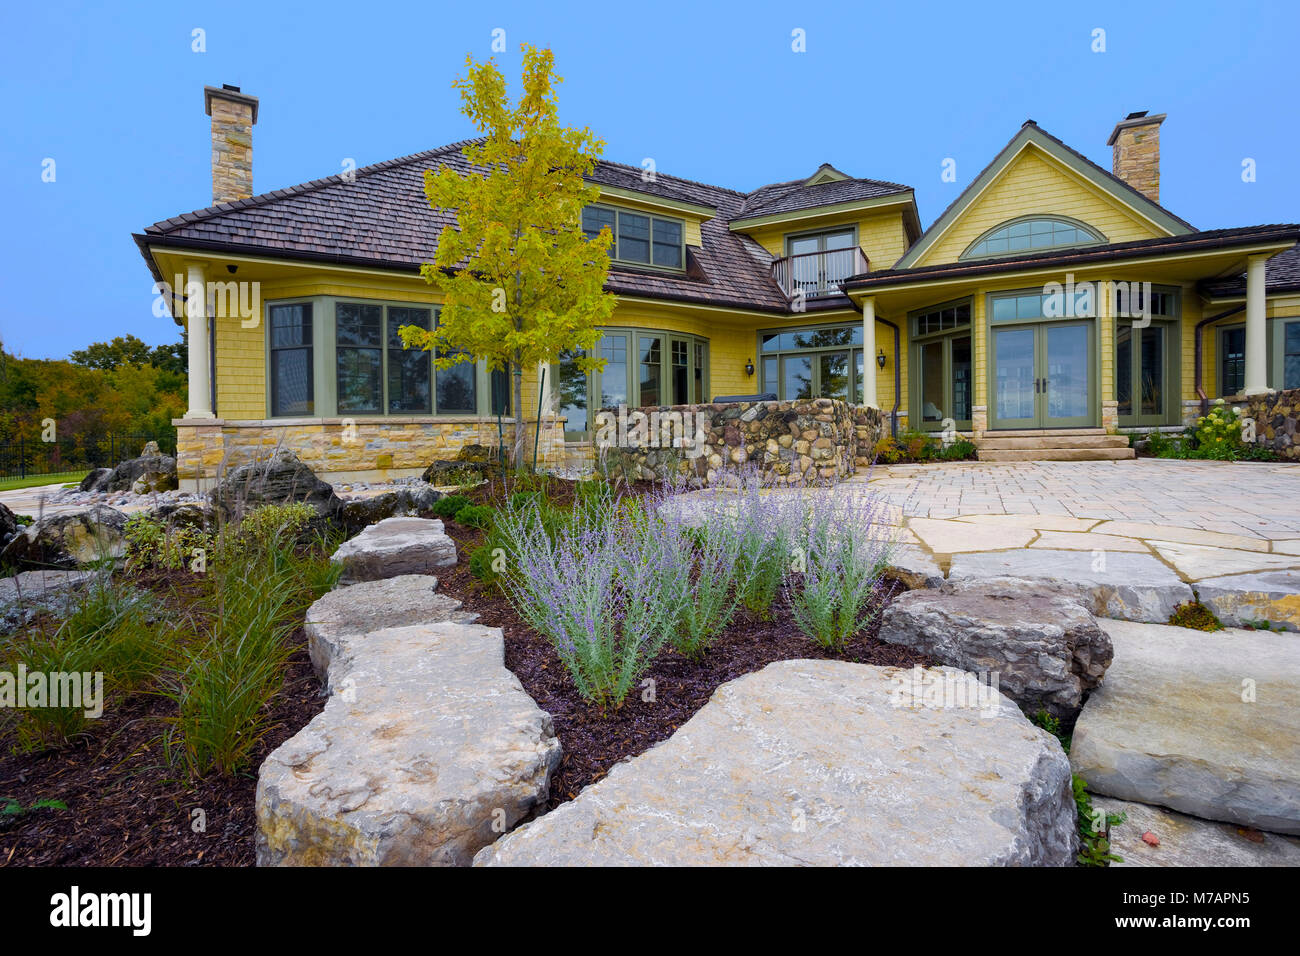 wood house exterior with stone landscaping Stock Photo